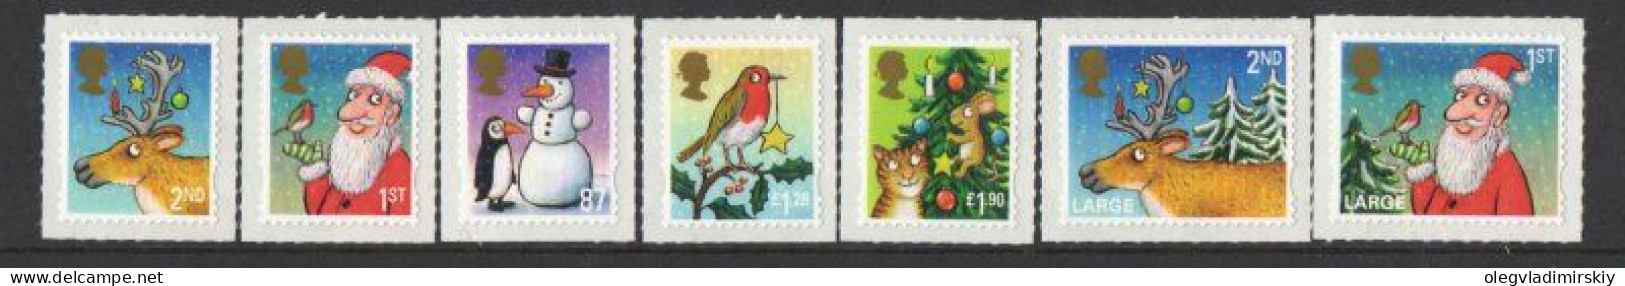 Great Britain United Kingdom 2012 Christmas Set Of 7 Self-adhesive Stamps MNH - Kerstmis